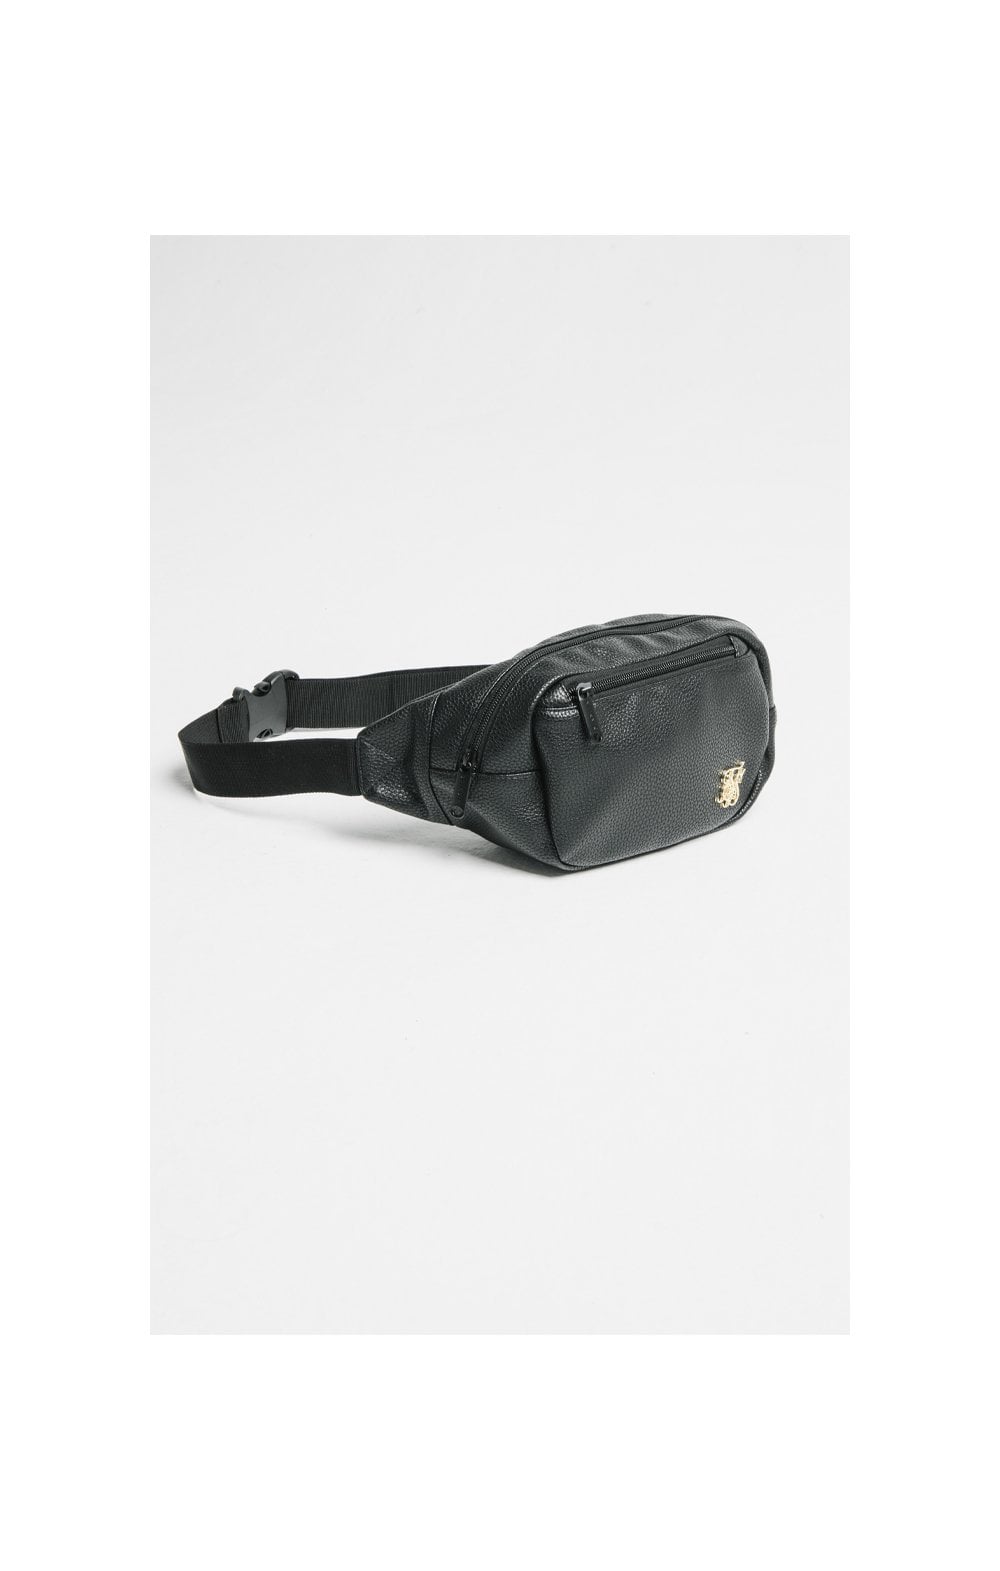 Load image into Gallery viewer, SikSilk Bumbag - Black (3)